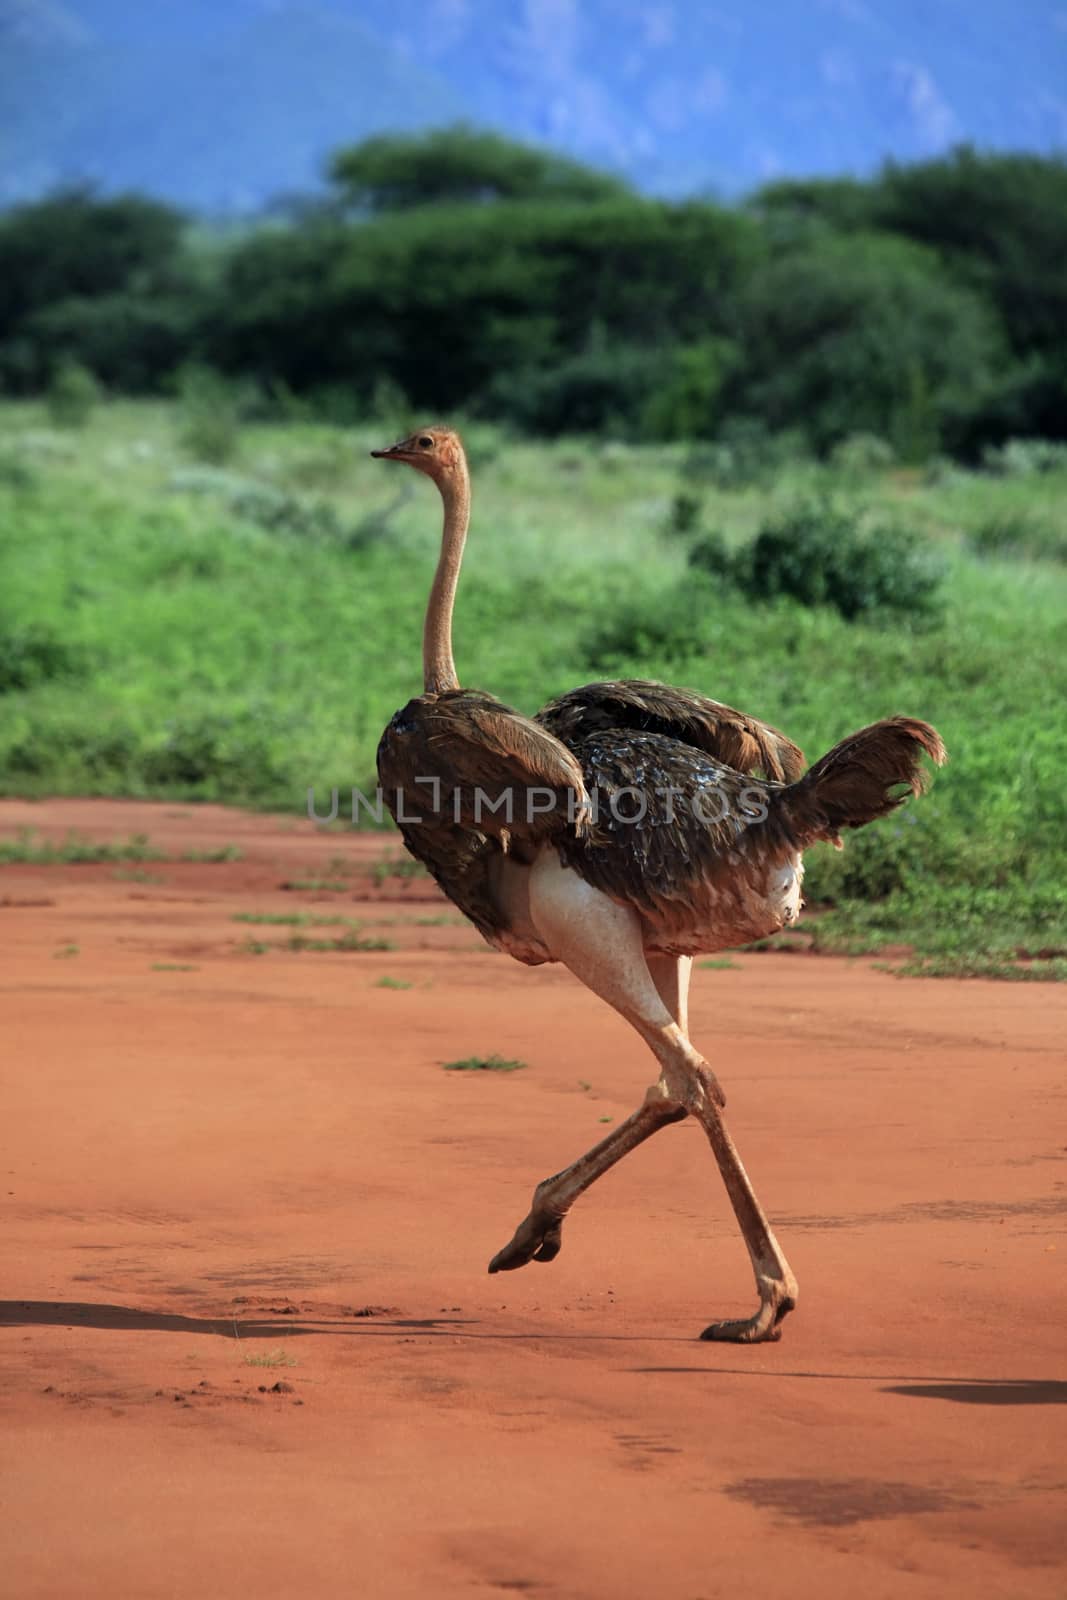 Ostrich in Tsavo East National Park, Kenya by friday